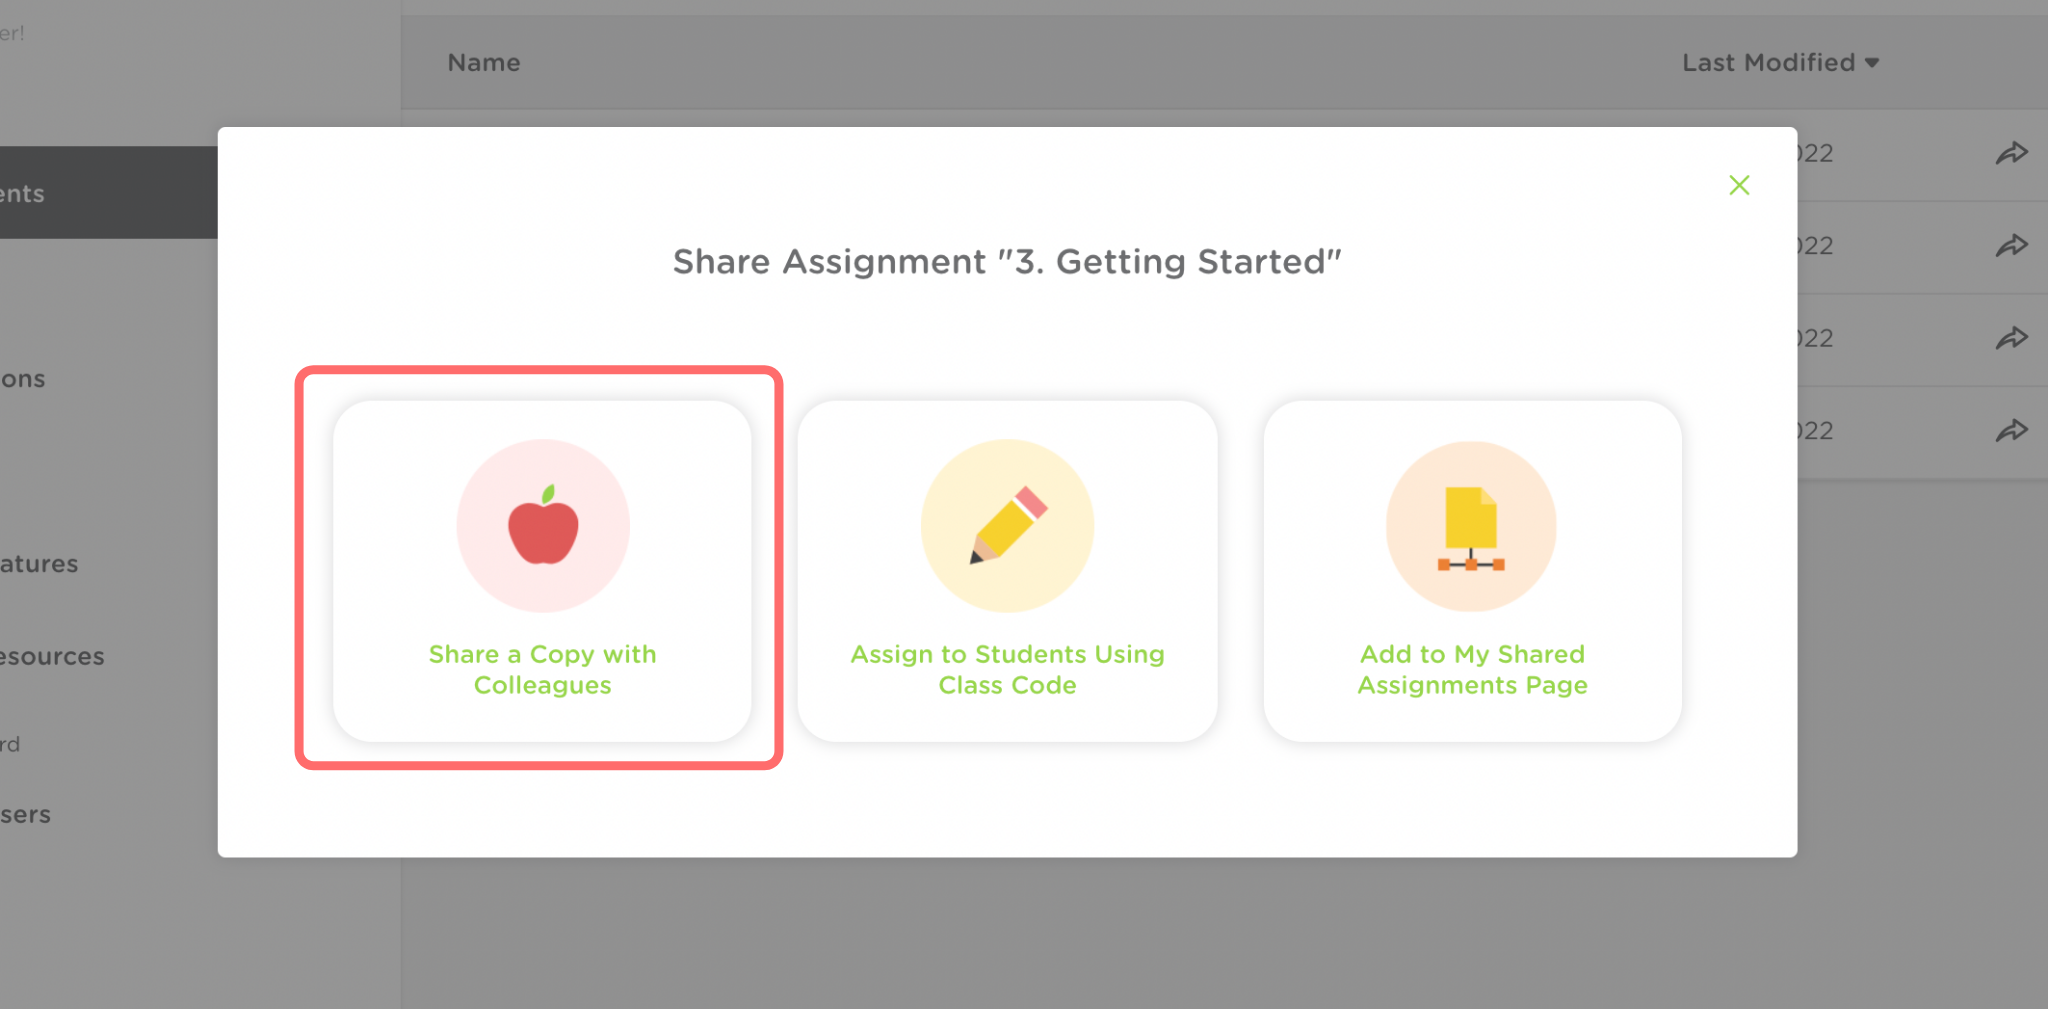 The Share assignment pop up window. Share a copy with colleagues is outlined in red.